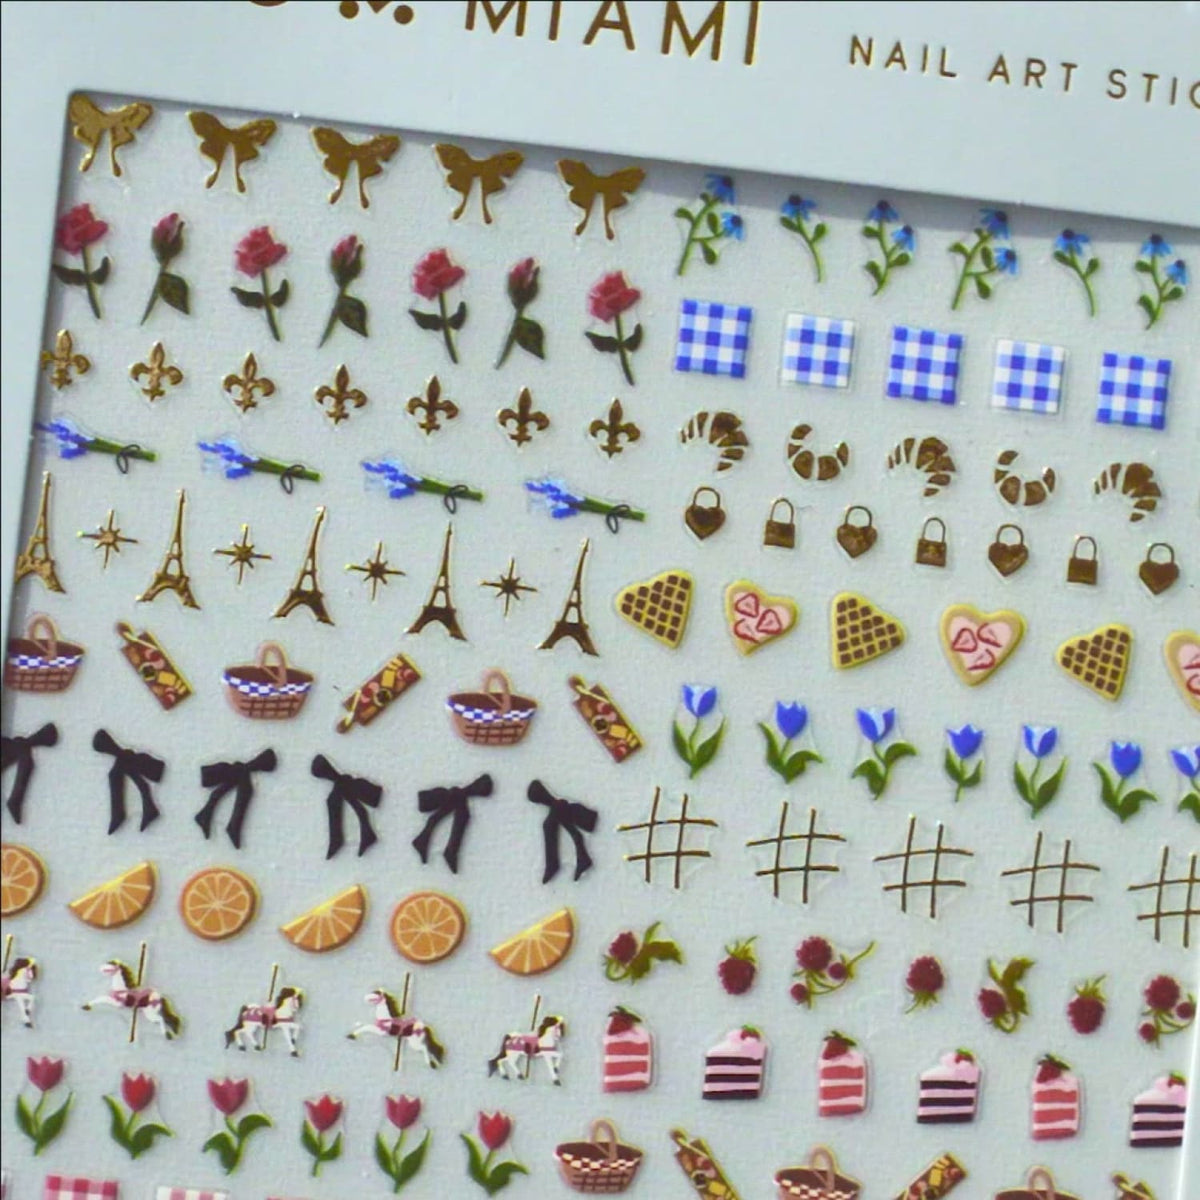 Deco Miami Nail Art Stickers 90s Baby - Bff Gifts - Body -